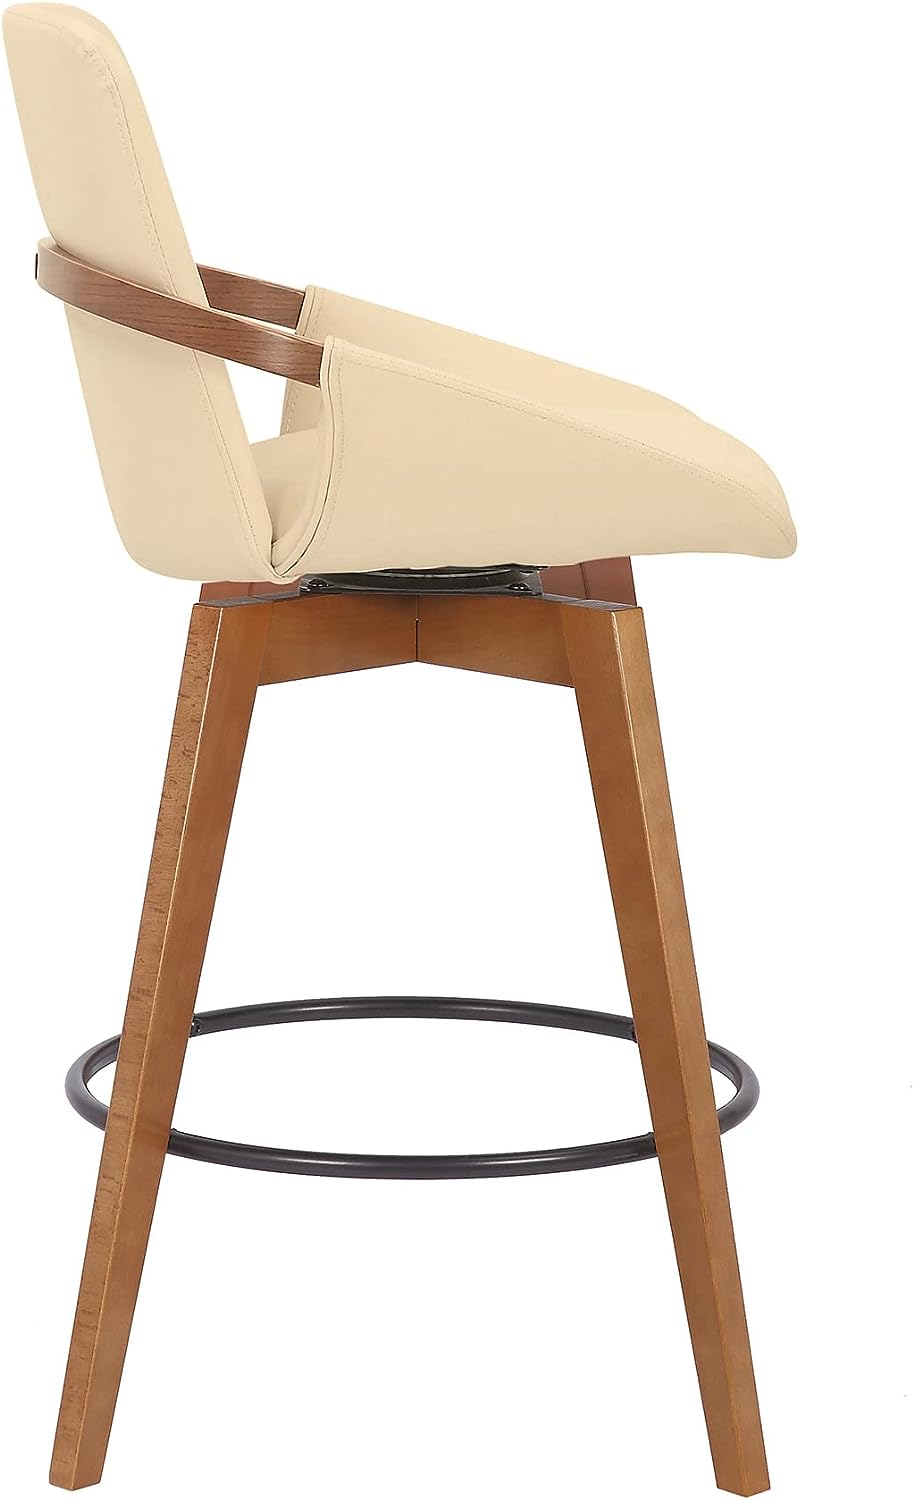 Armen Living Baylor Swivel Wood Bar or Counter Height Stool in Faux Leather, Cream/Walnut, 26" Counter Height